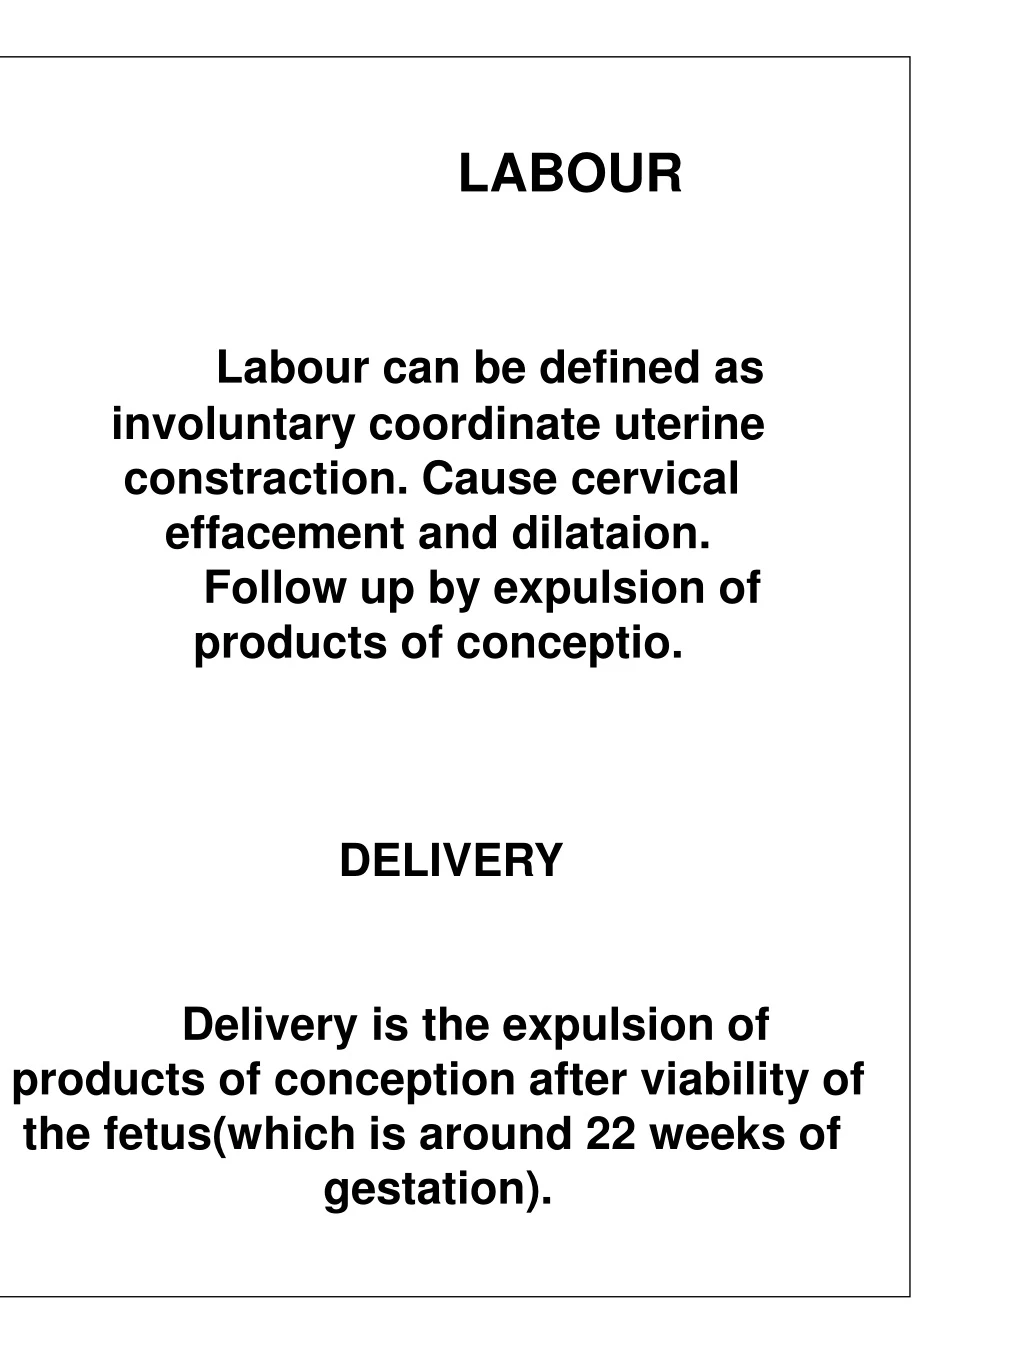 labour labour can be defined as involuntary